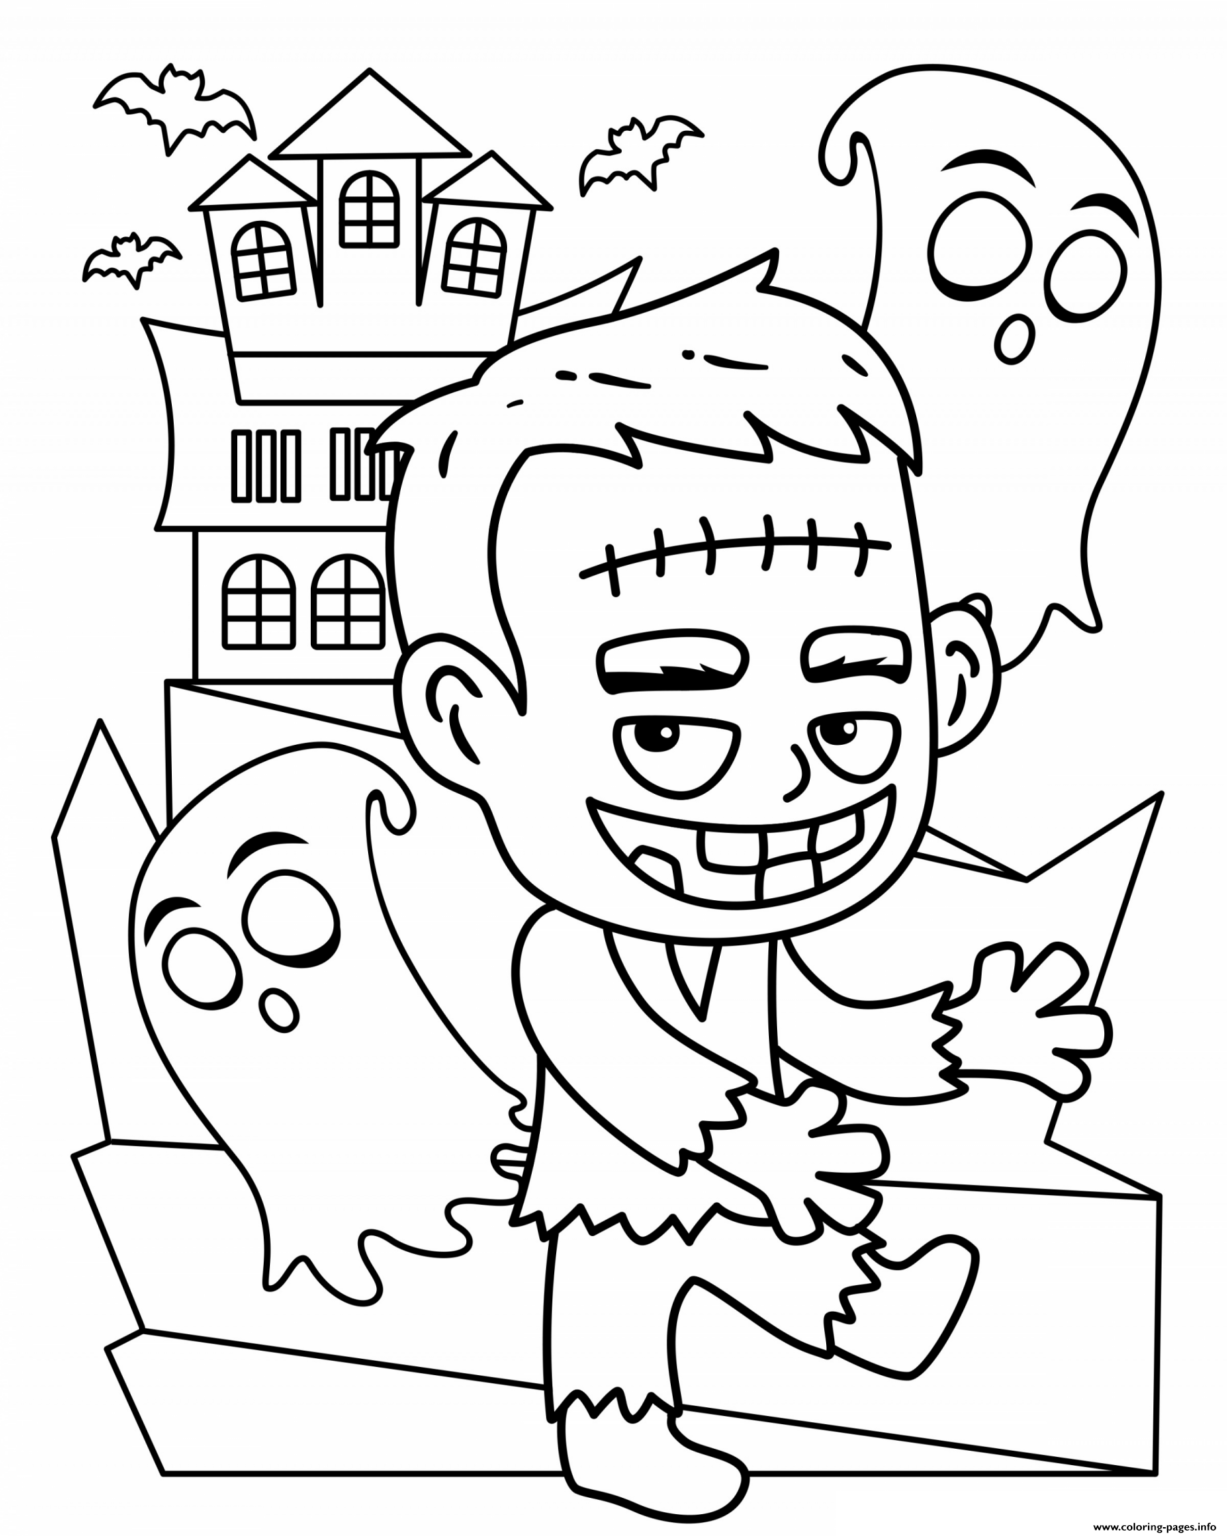 10 Fun Frankenstein Coloring Pages - Makes for Fantastic Decorations